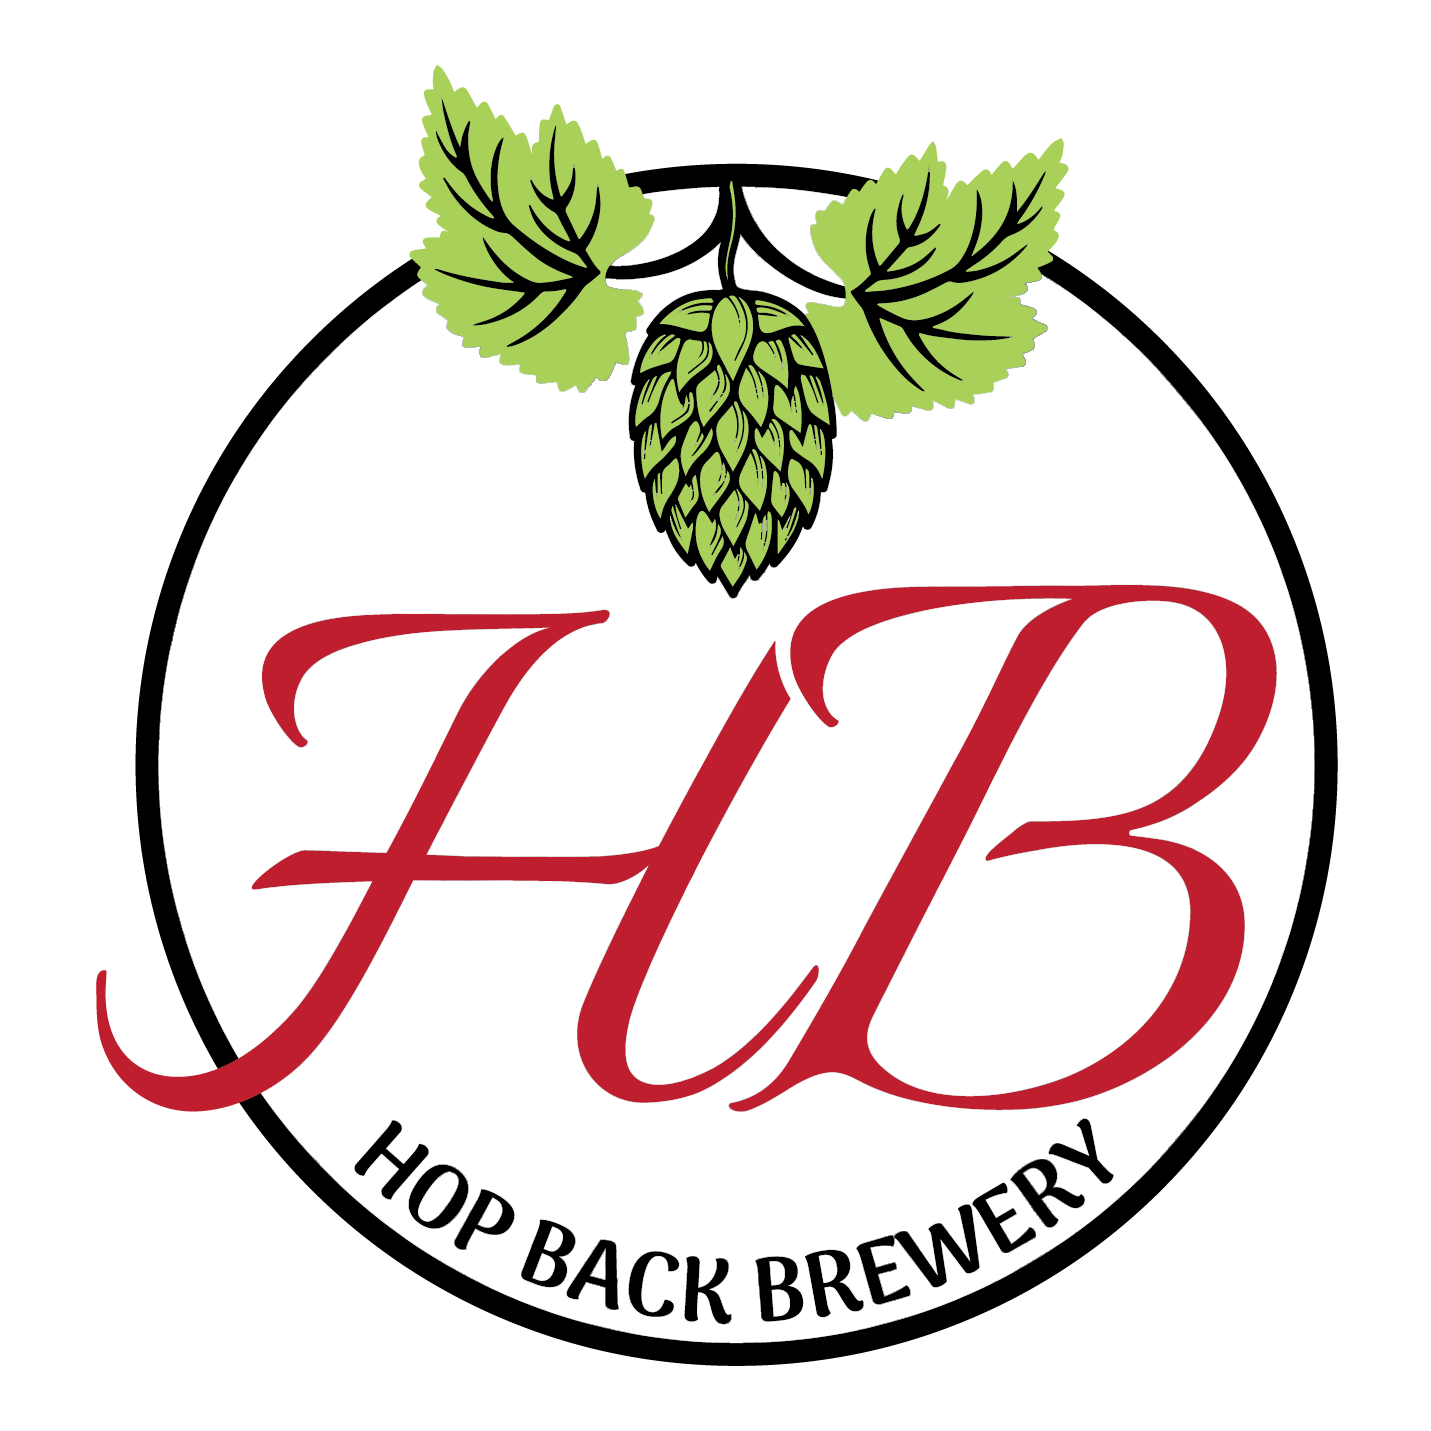 Hop Back Brewery